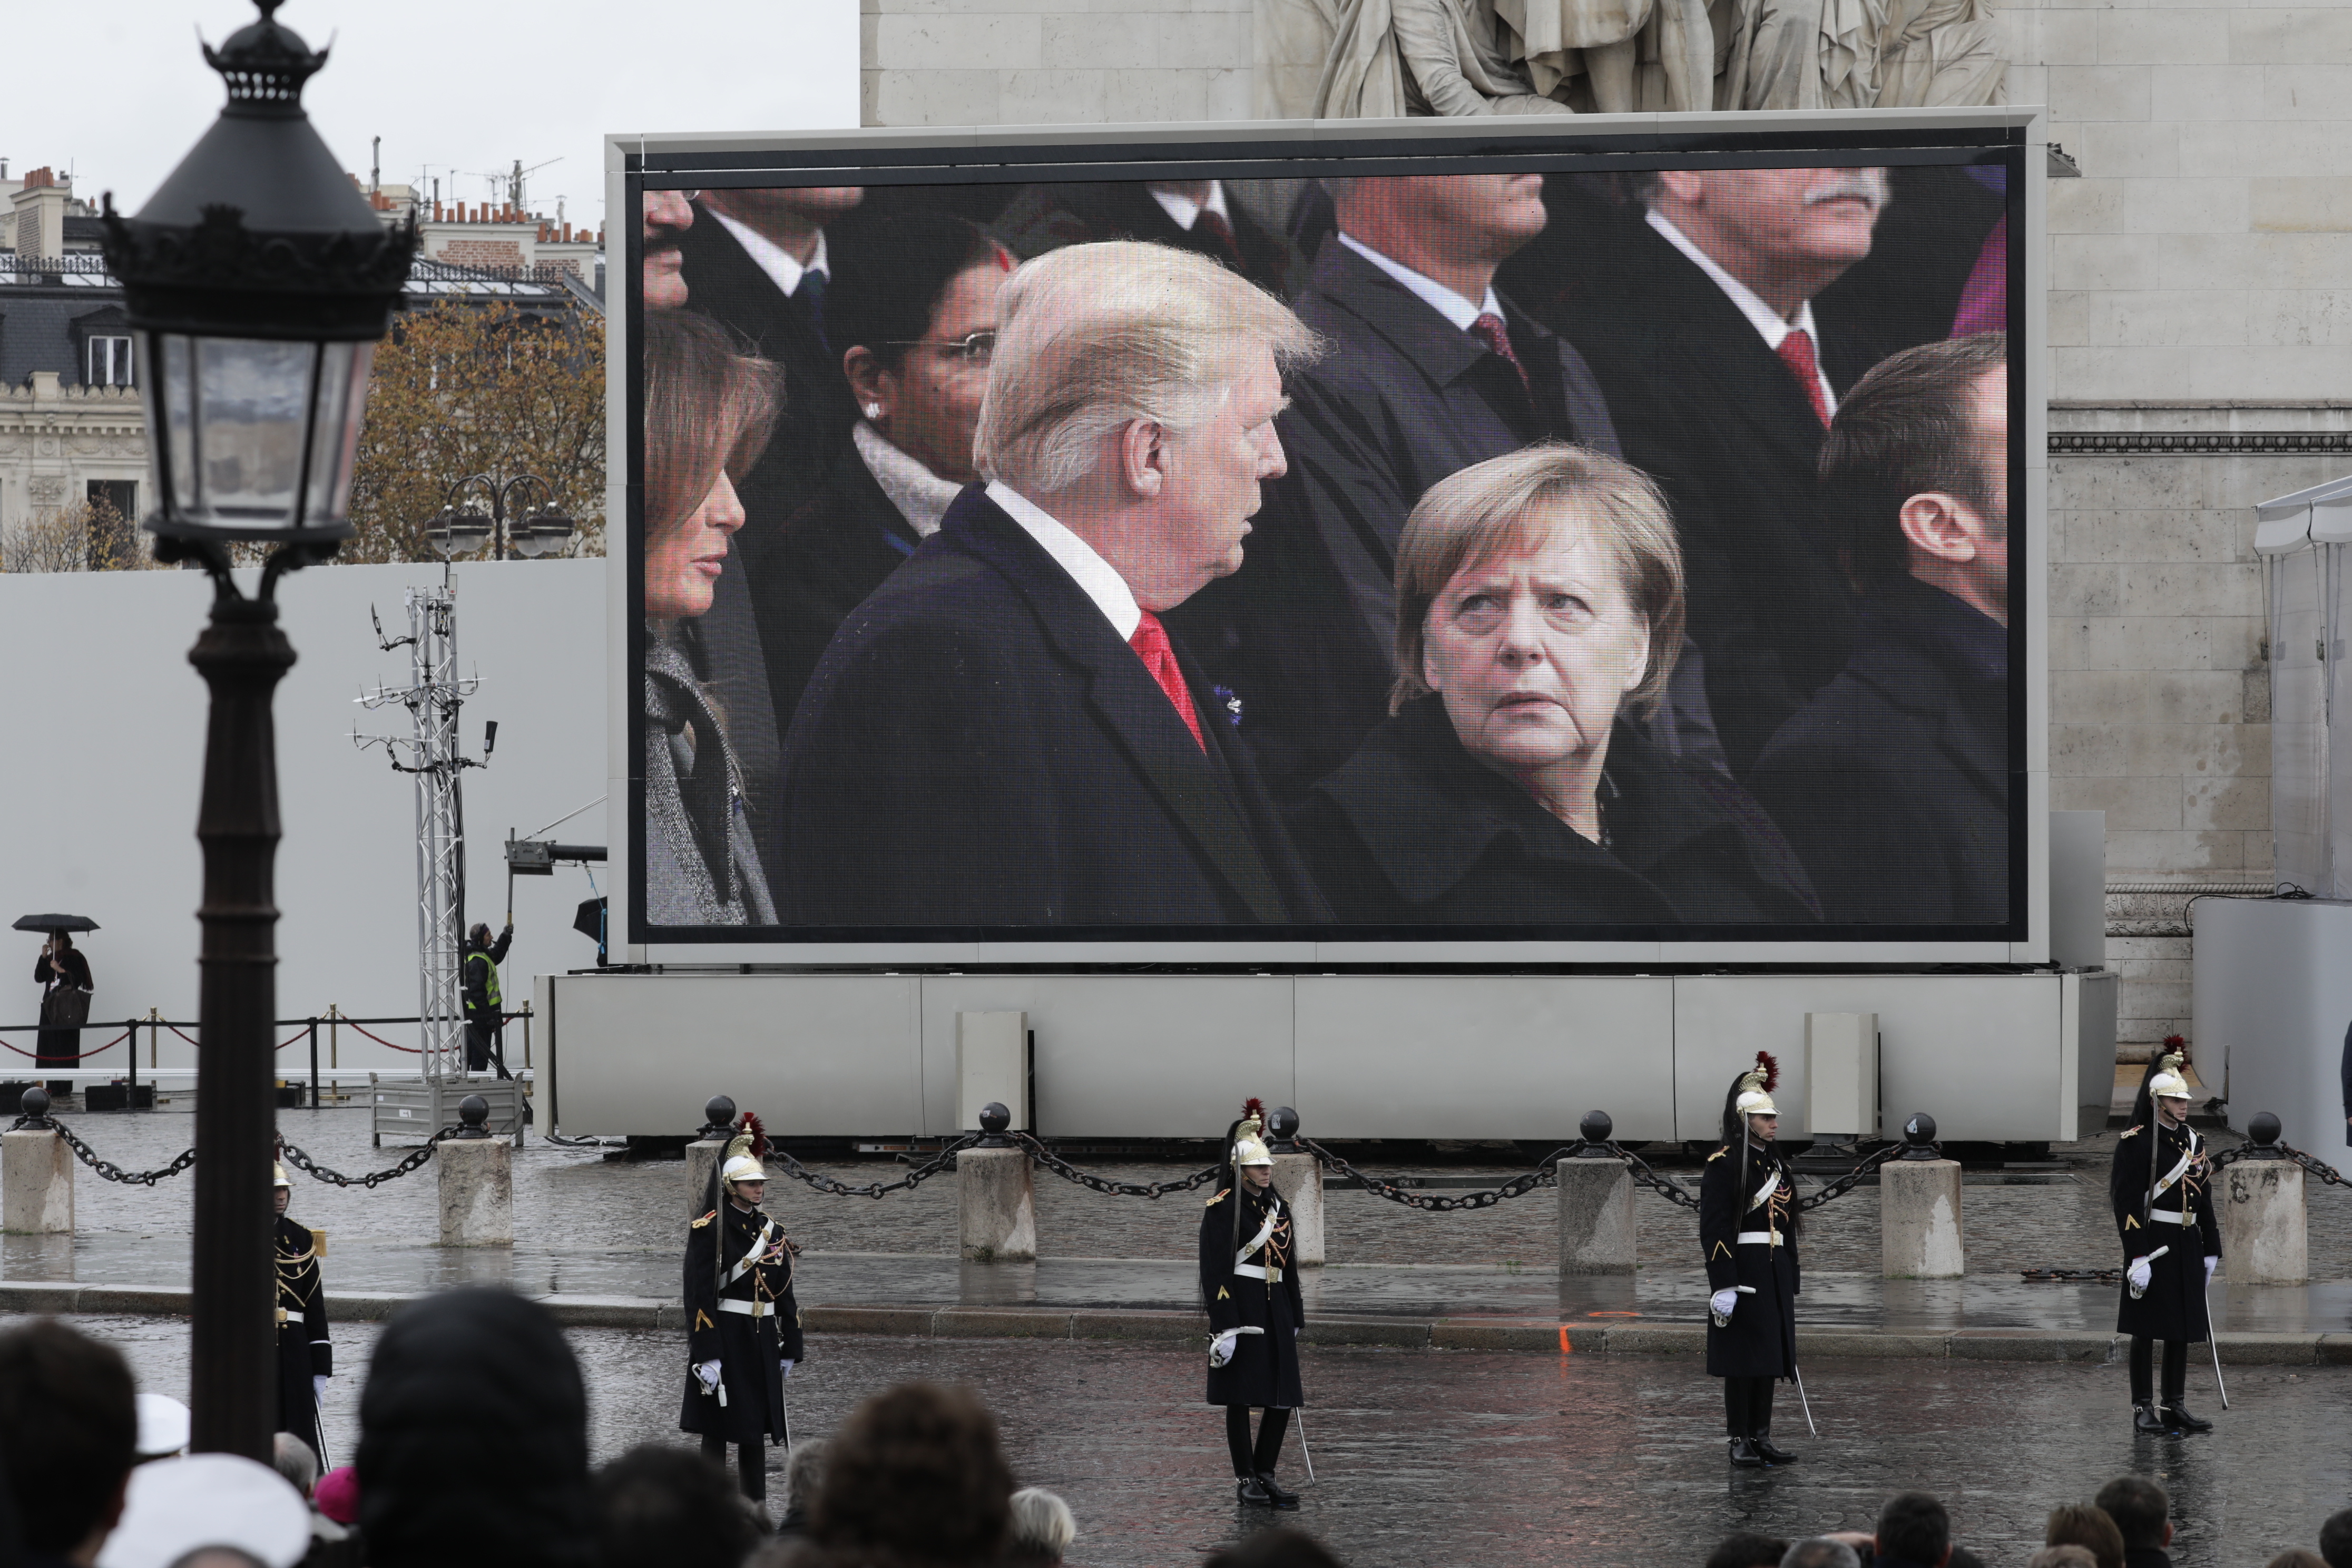 11 November 2018, France (France), Paris: A video screen will show how Chancellor Angela Merkel (r) and Donald Trump, President of the USA, talk. Around 60 heads of state and government are in Paris to commemorate the end of the First World War a hundred years ago. Photo by: Kay Nietfeld/picture-alliance/dpa/AP Images